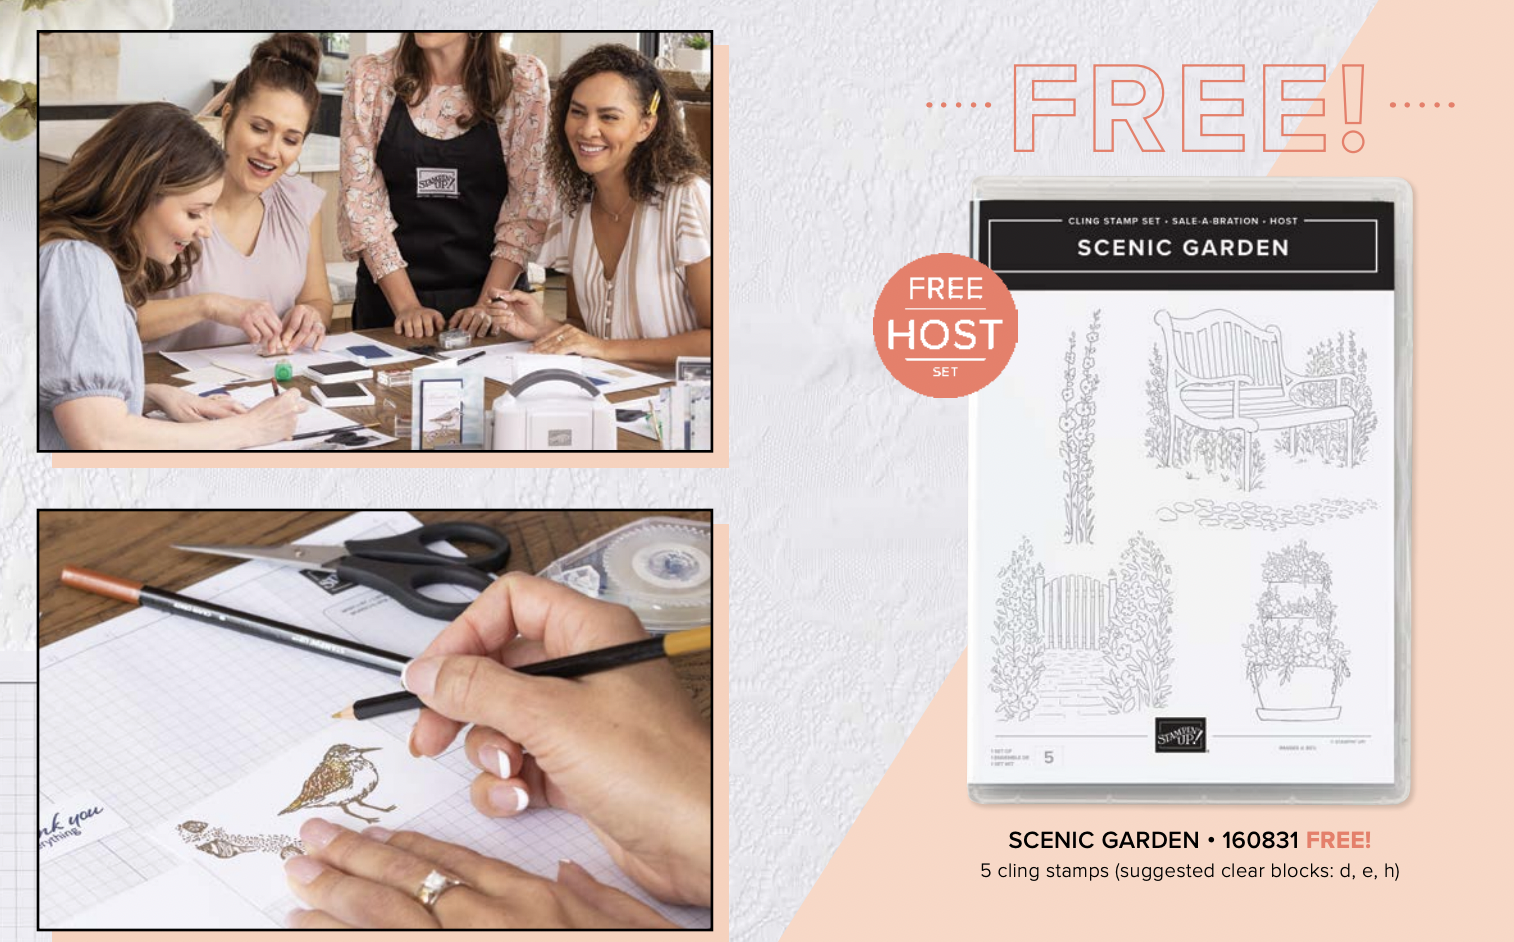 Earn the Scenic Garden stamp set for free during Sale-a-bration